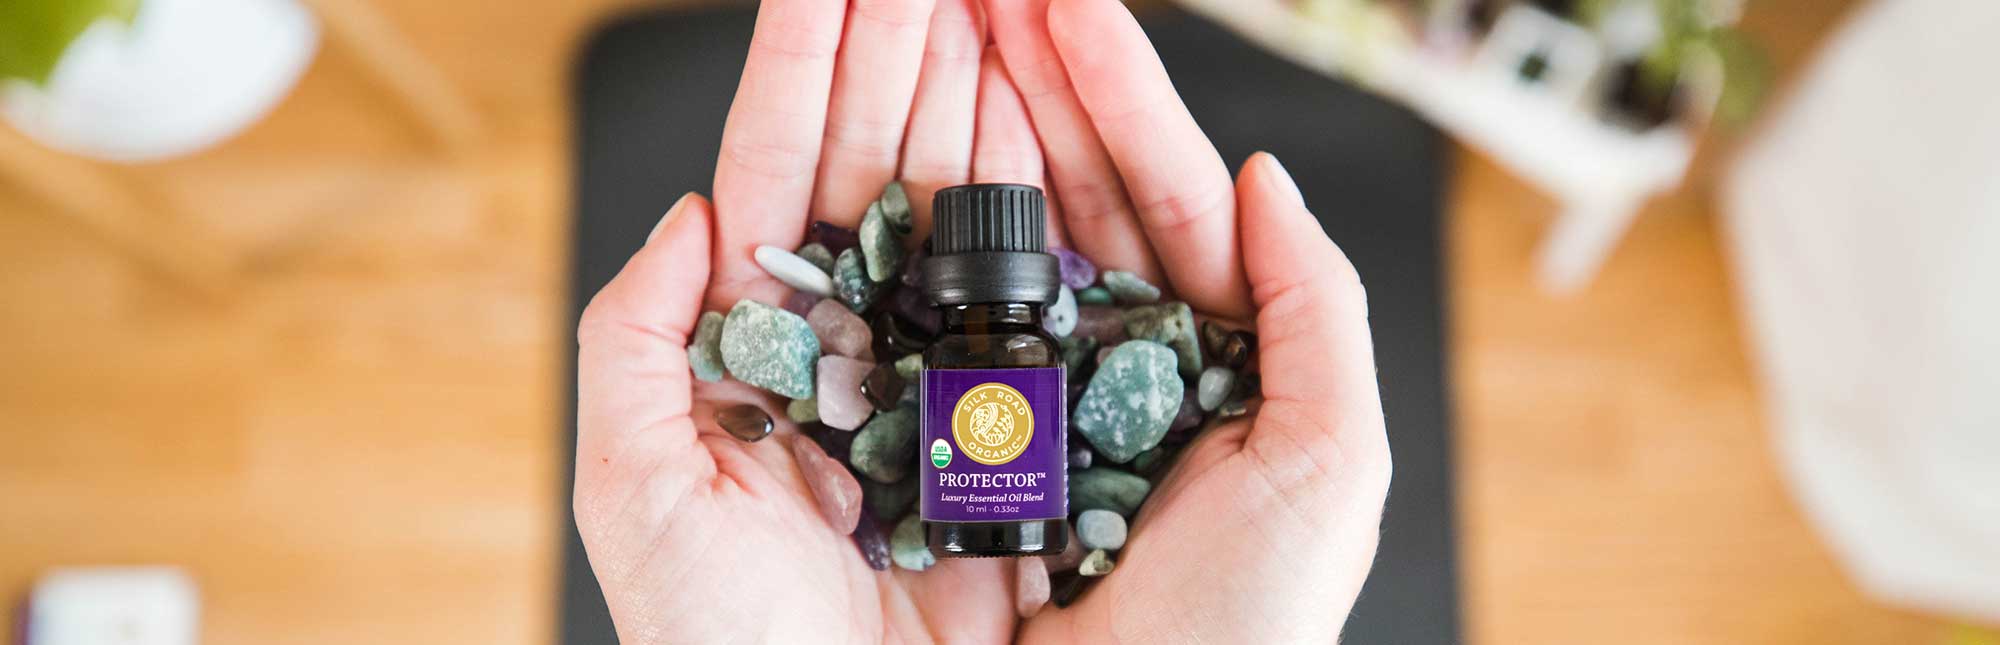 protector essential oil diffuser blend undiluted boost immunity fight infection